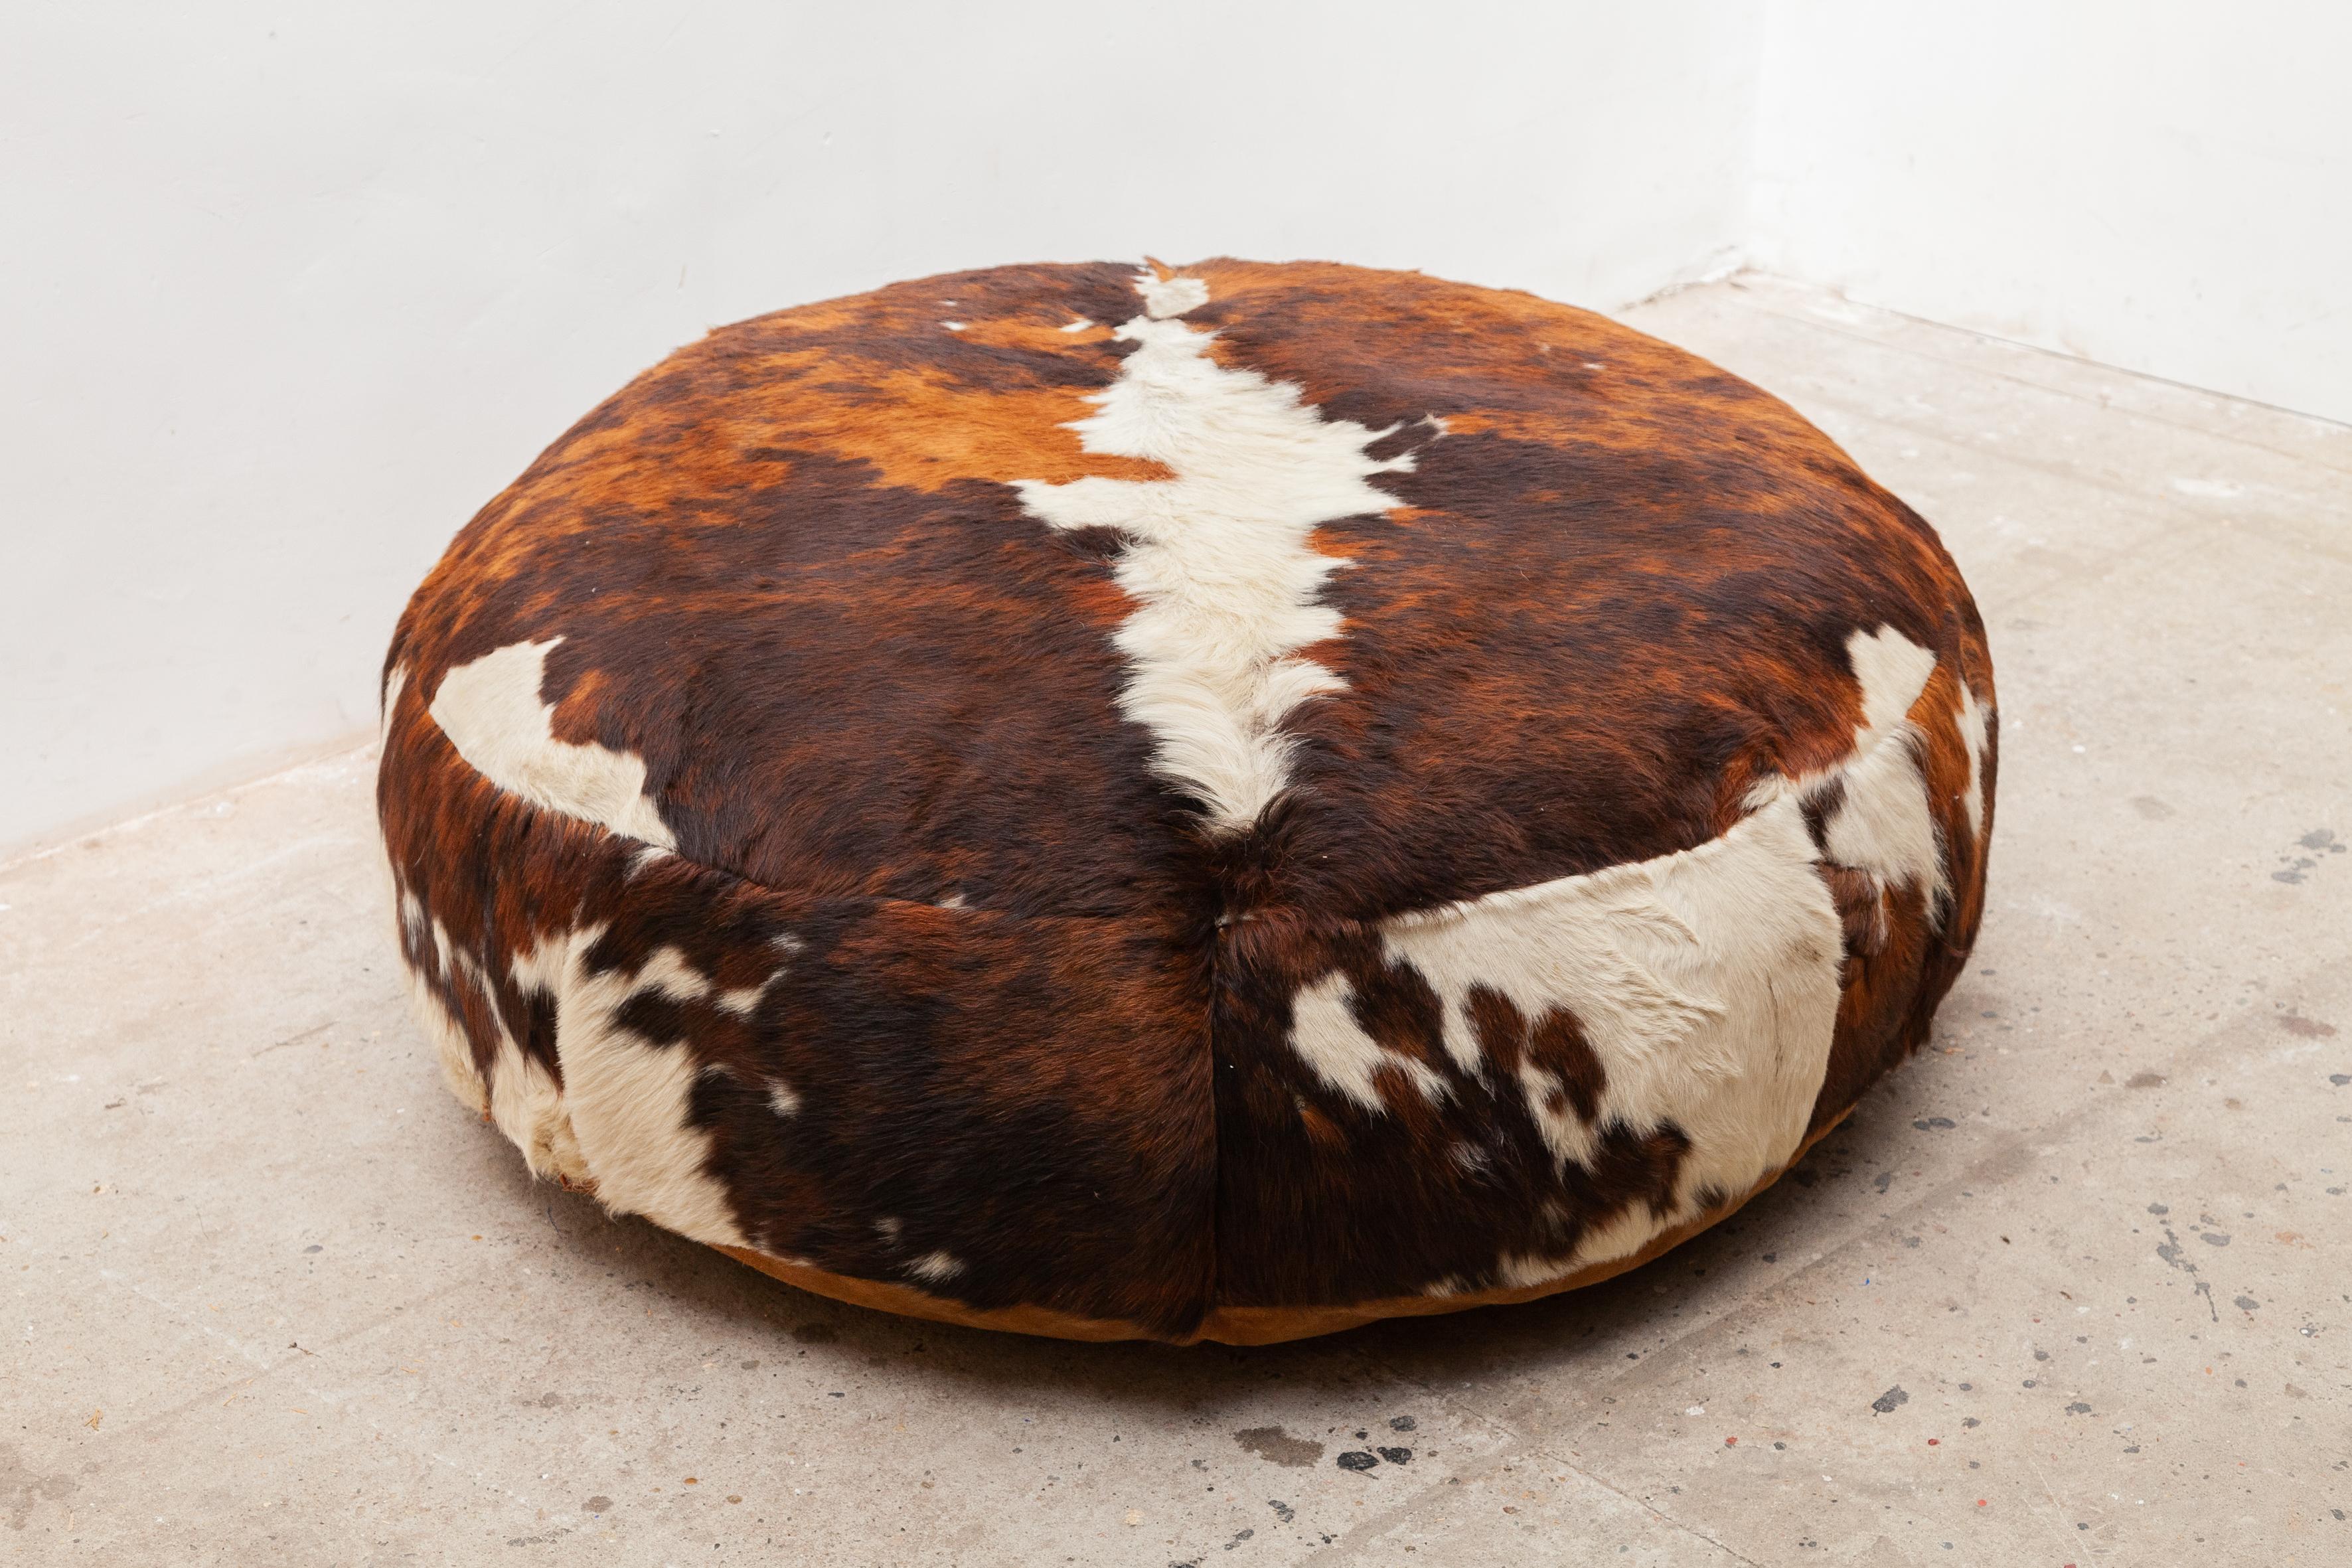 Vintage pouf with a cuddly factor extra large relax pouf. Great to complement a seating area. The pouf is in a very good condition with some signs of age and use. Measure: Diameter 110 cm.